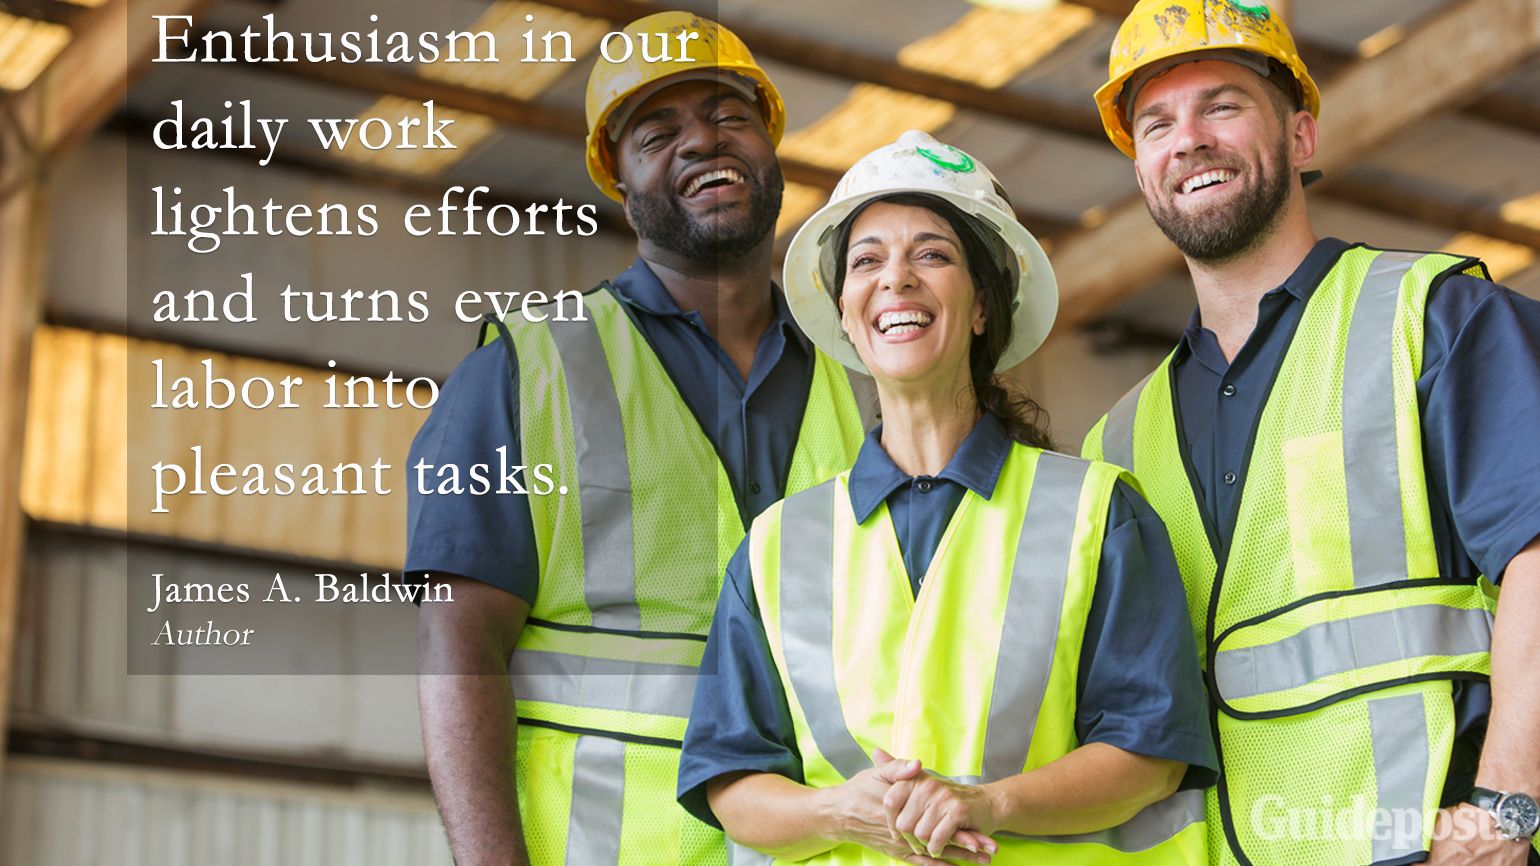 Inspiring Labor Day Quotes: "Enthusiasm in our daily work lightens efforts and turns even labor into pleasant tasks." James A. Baldwin better living life advice